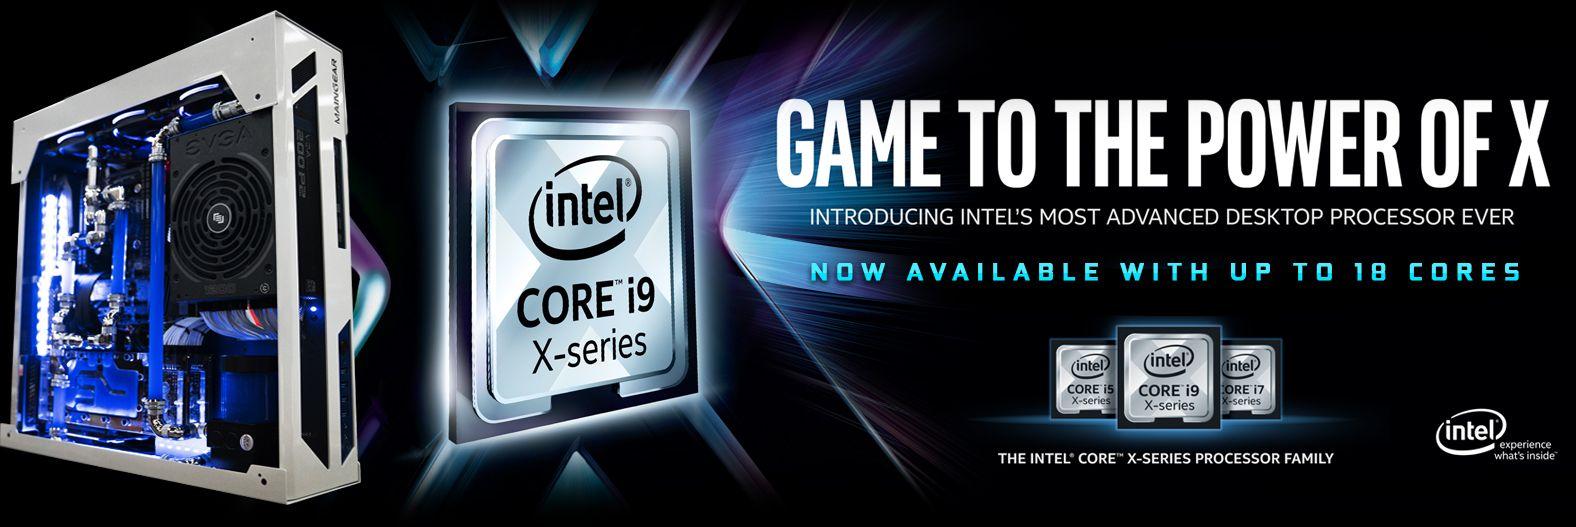 Intel PC Game Logo - MAINGEAR PC | X299 - NOW WITH 18 CORES